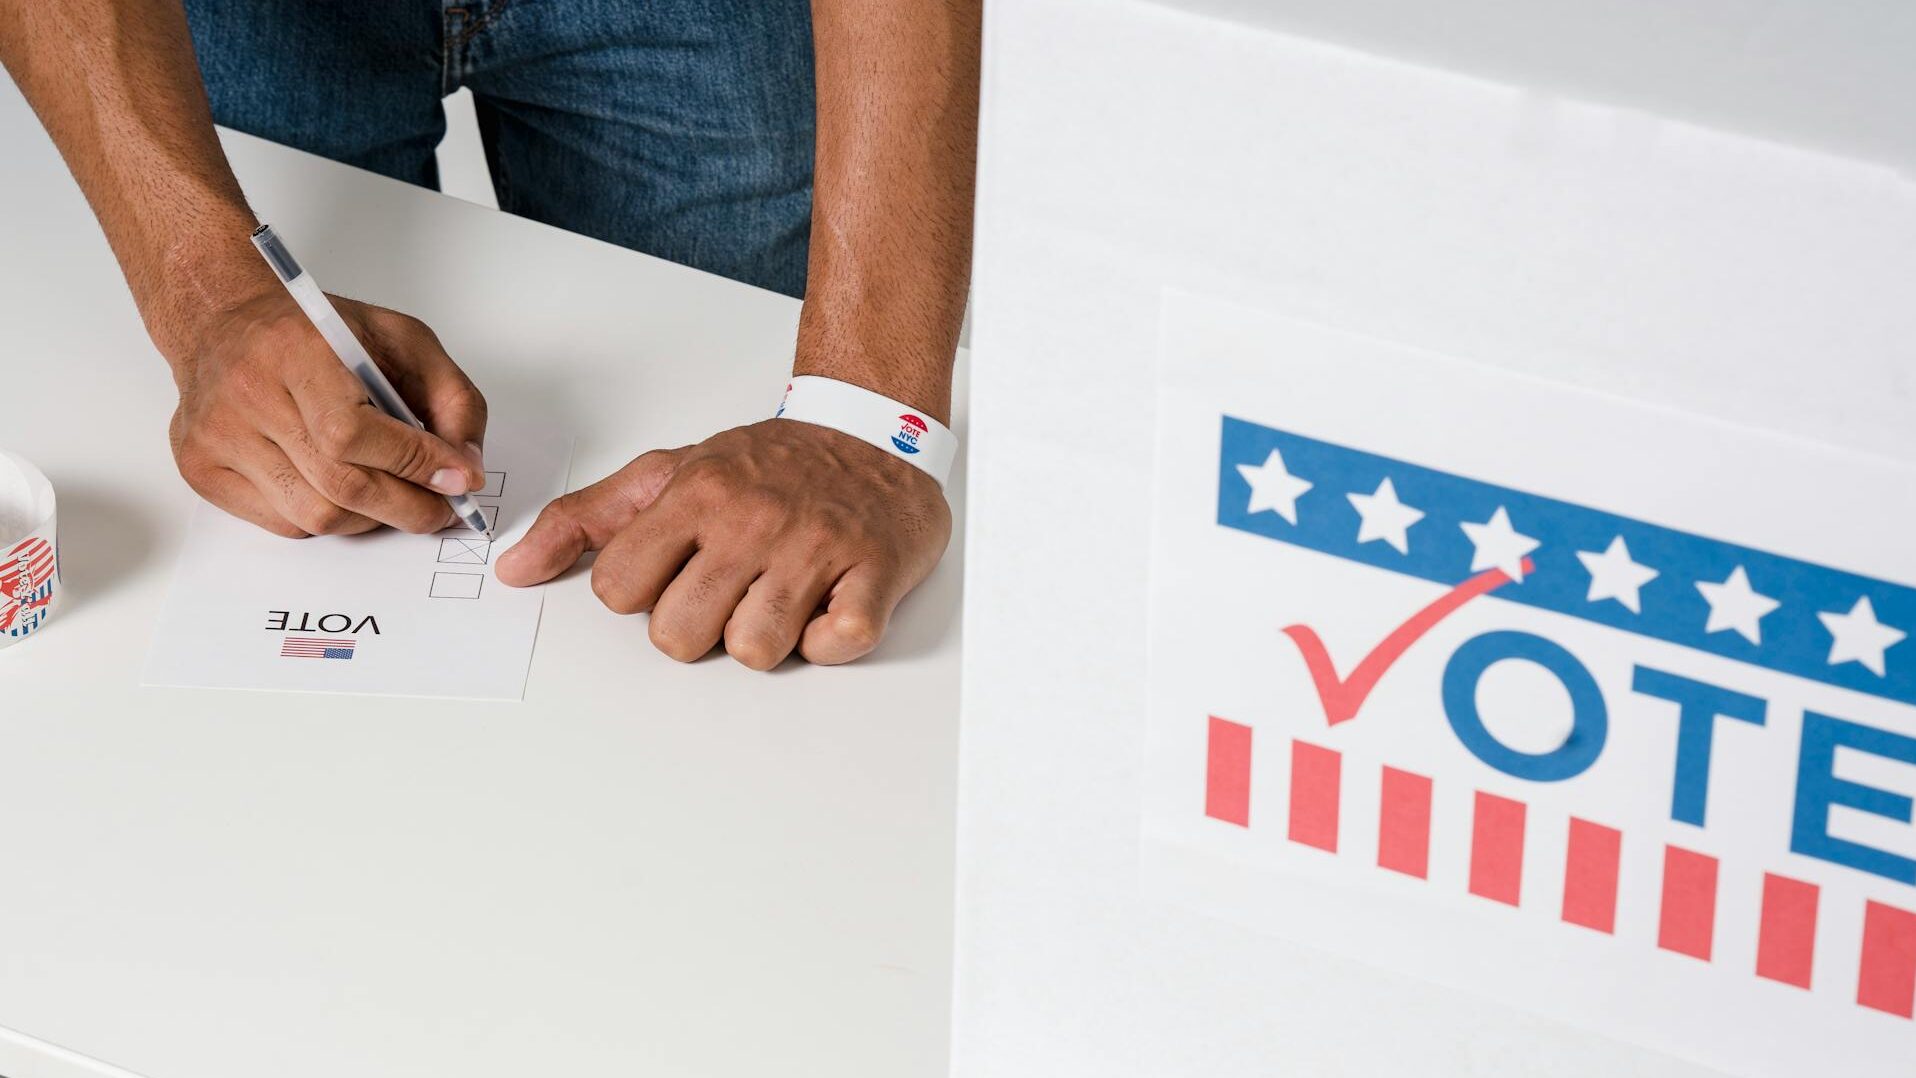 Unofficial voter registration site collects pennsylvanians’ info for ‘political activities’